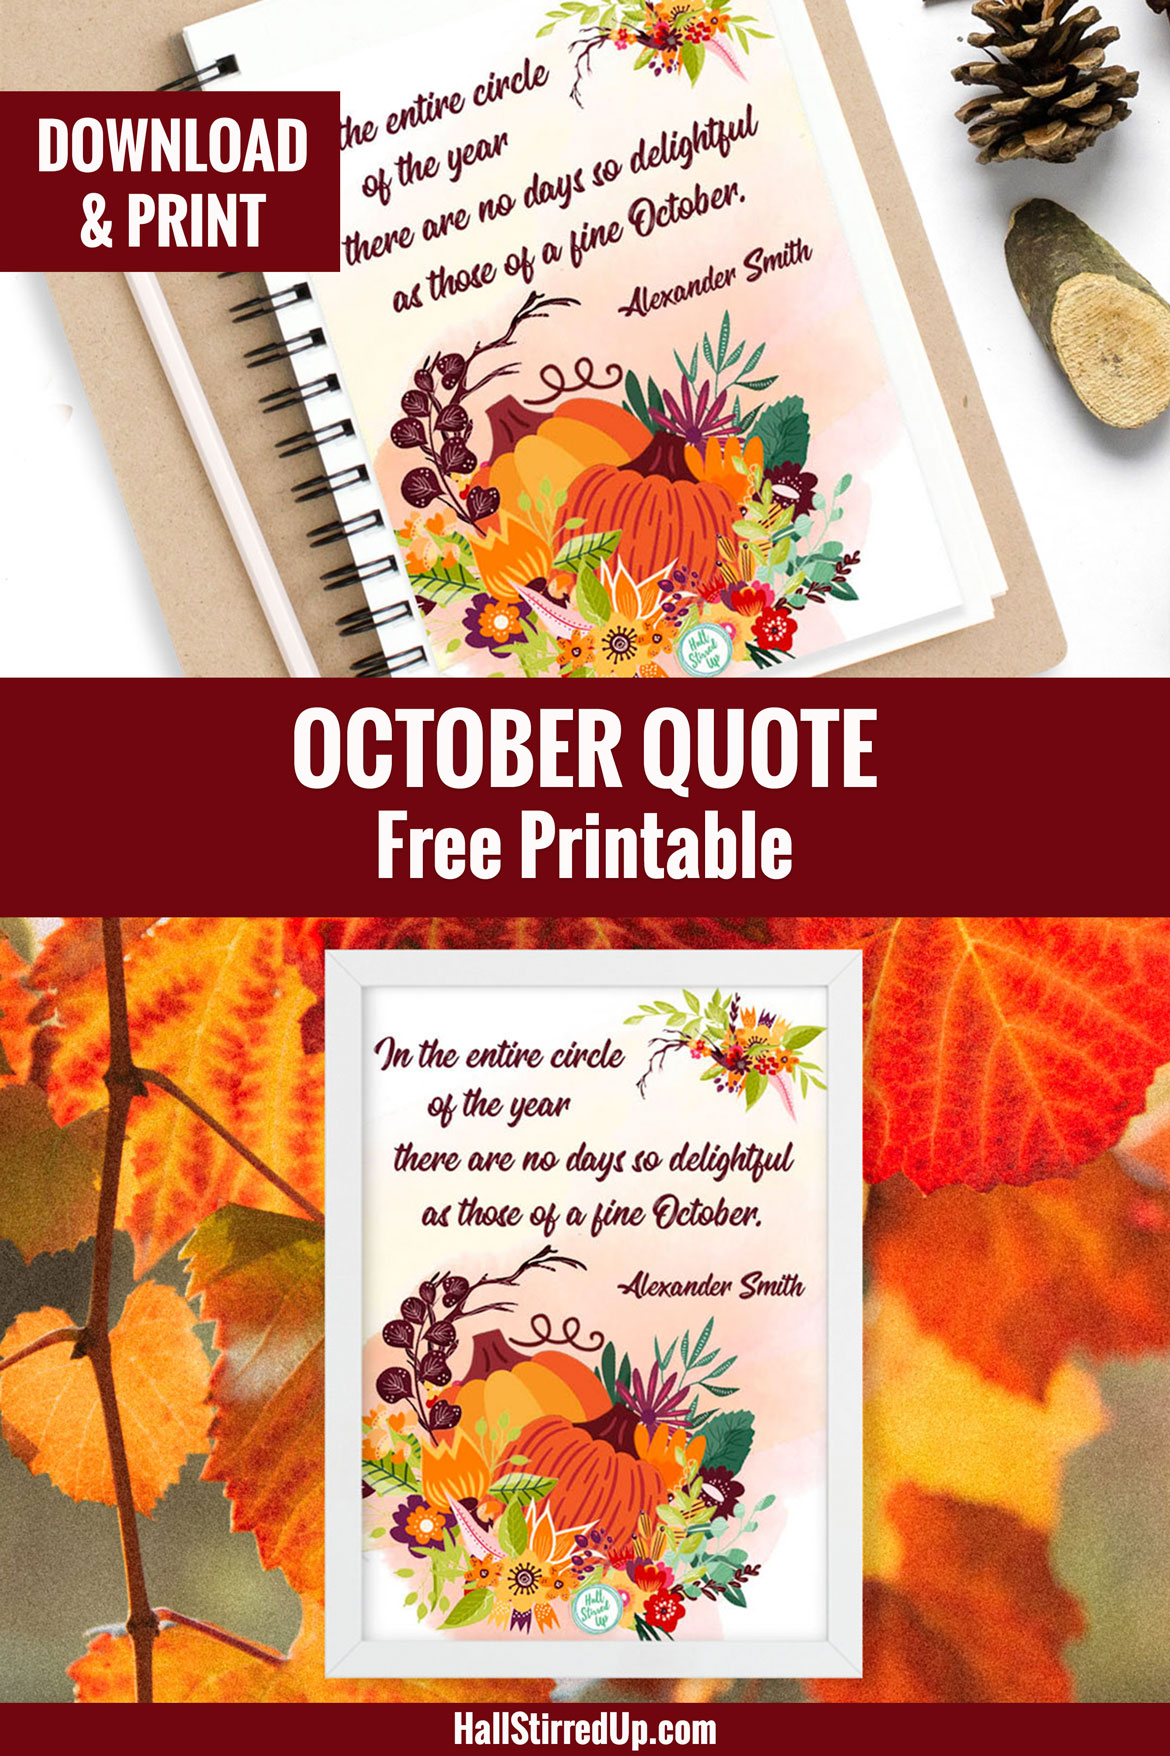 It's a fine October and time for new quotes and a free printable!